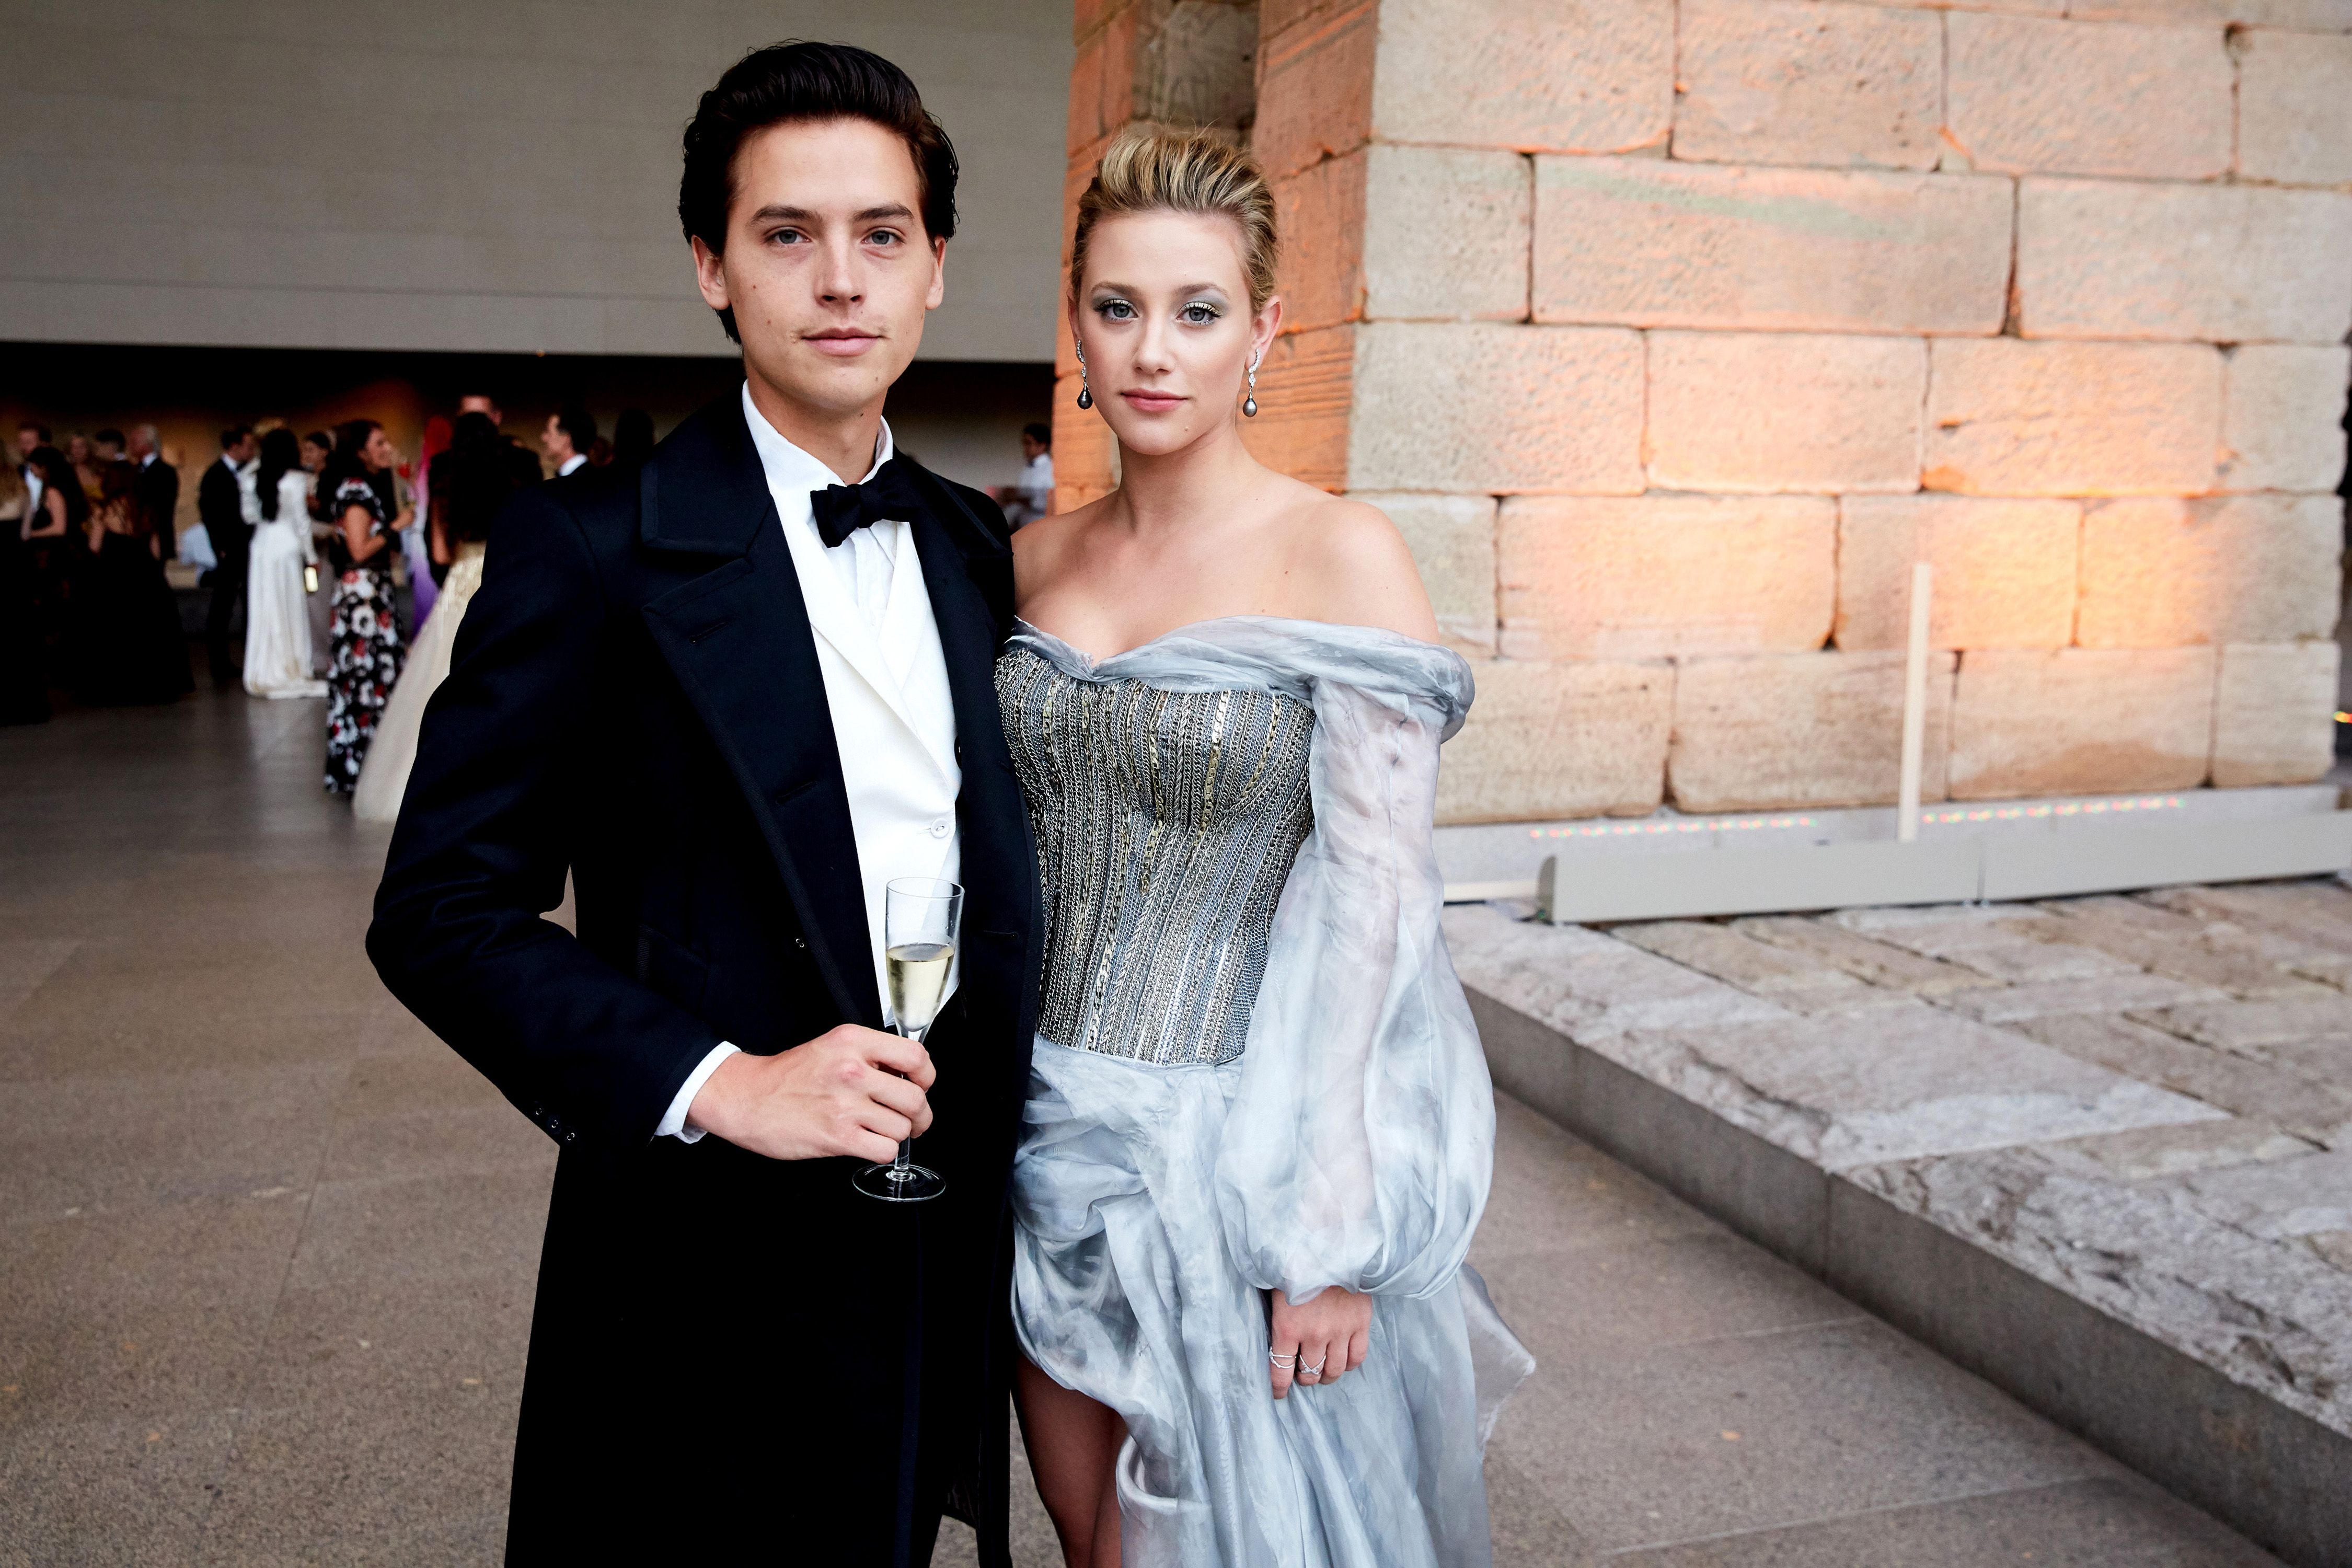 Lili Reinhart Posted, Deleted Snarky Comment About Cole Sprouse